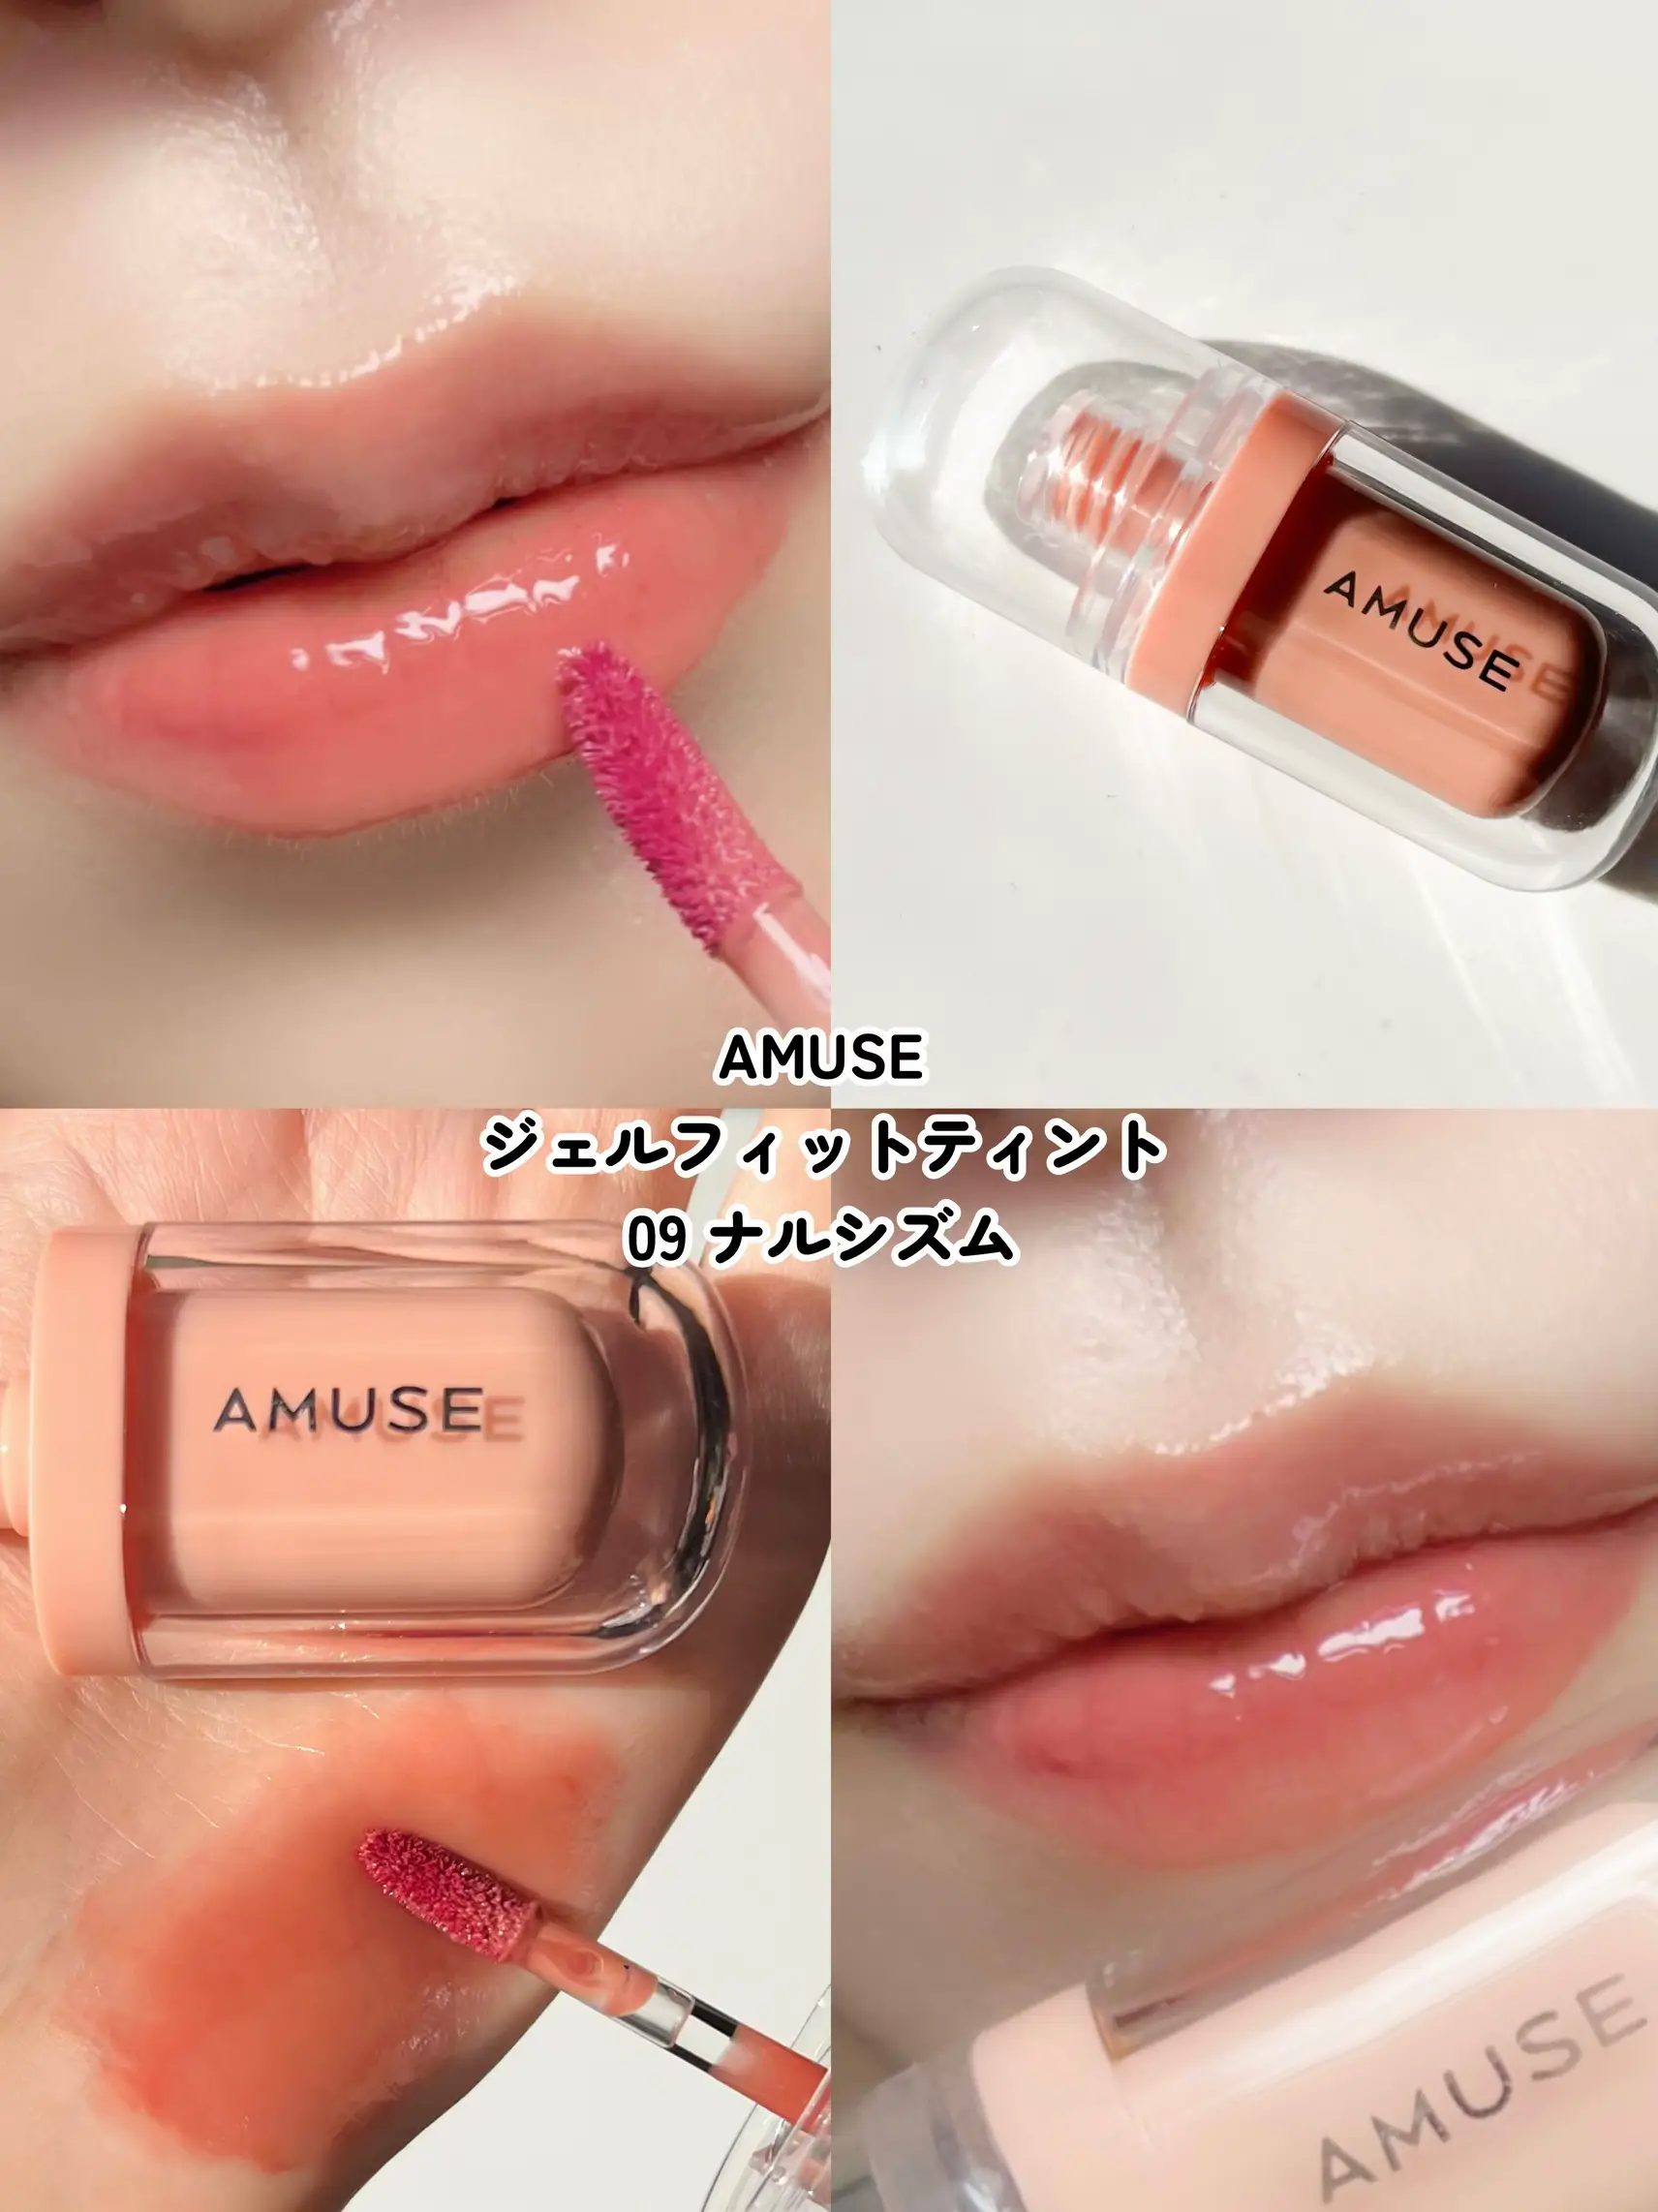 AMUSE limited new work 】 I want you to check the Japan release